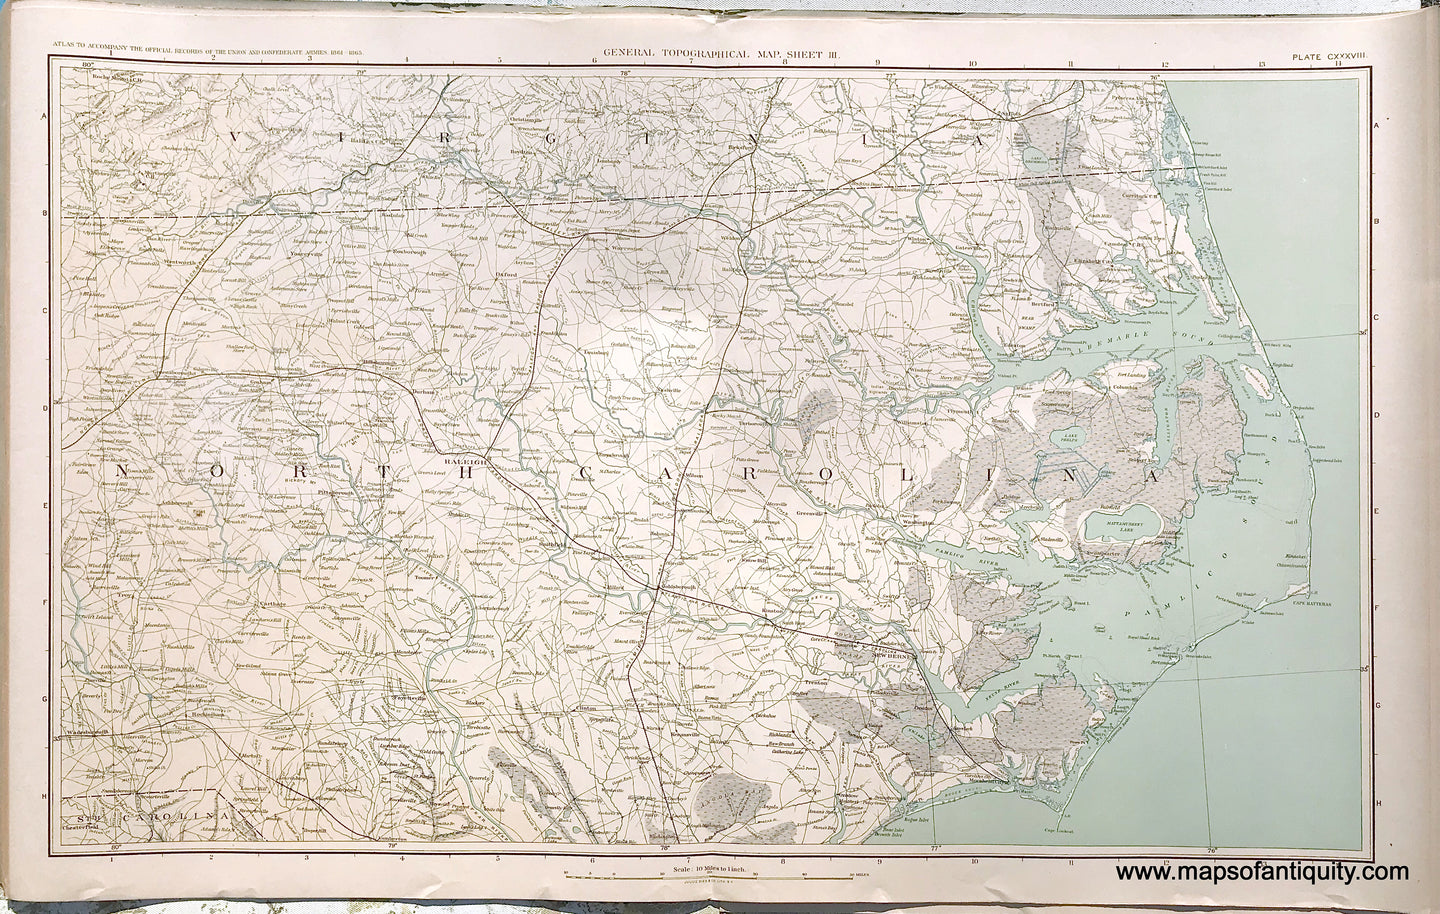 Antique-Lithograph-Print-Plate-138.-General-Topographical-Map.-Sheet-III.-Sections-of-Virginia-North-Carolina-and-small-inset-of-South-Carolina.-1894-US-War-Dept.-Civil-War-Civil-War-1800s-19th-century-Maps-of-Antiquity